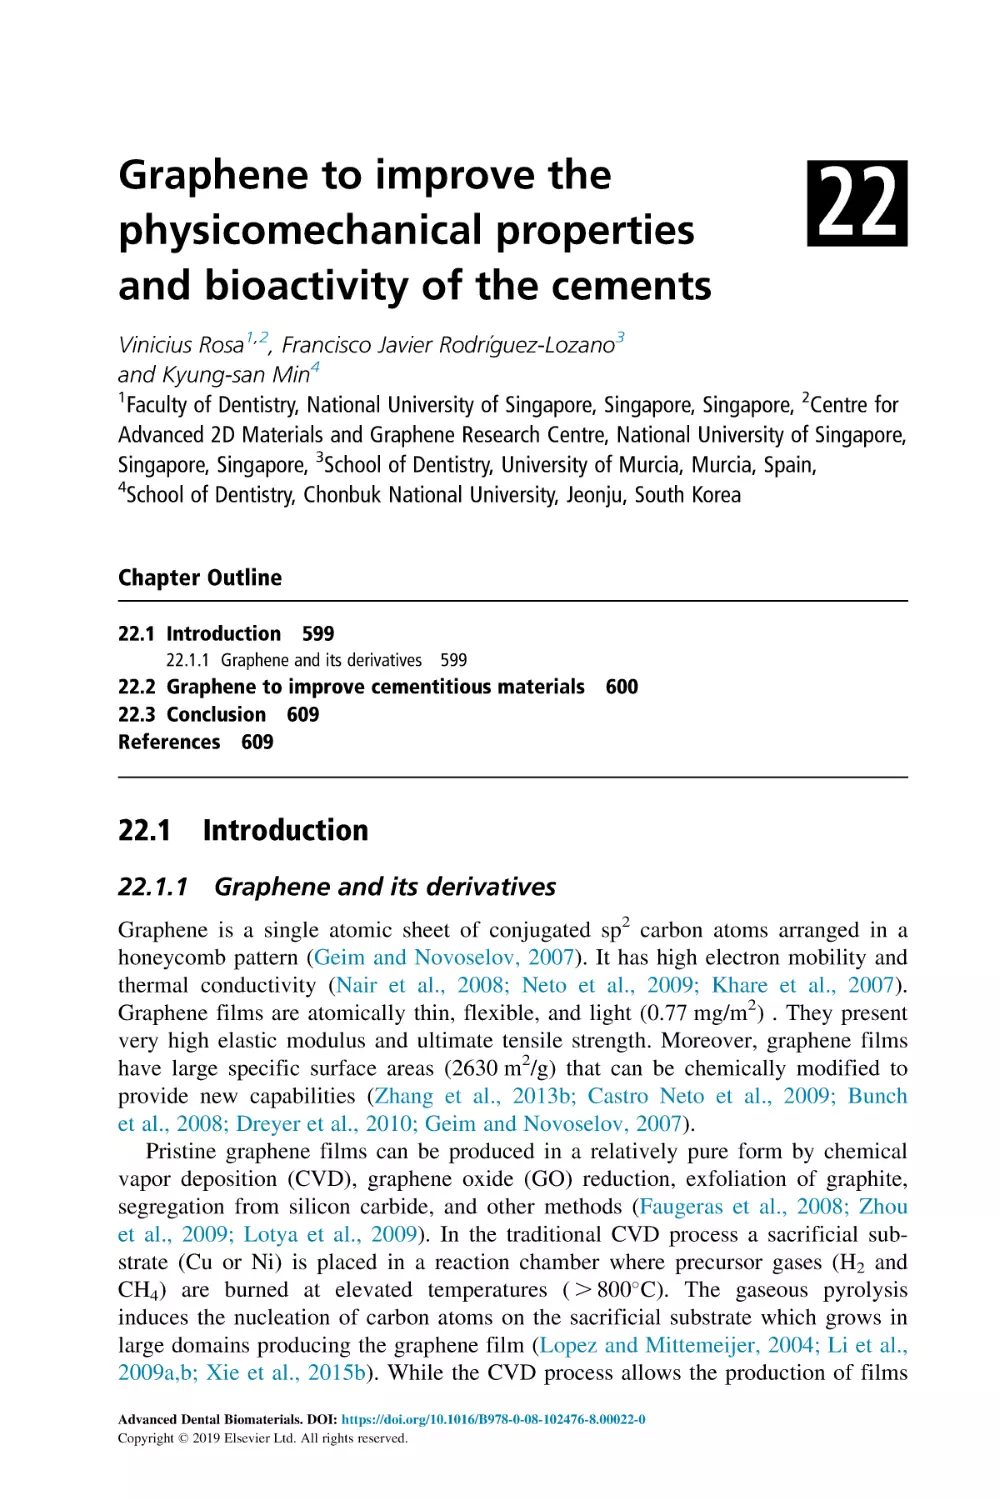 22 Graphene to improve the physicomechanical properties and bioactivity of the cements
Chapter Outline
22.1 Introduction
22.1.1 Graphene and its derivatives